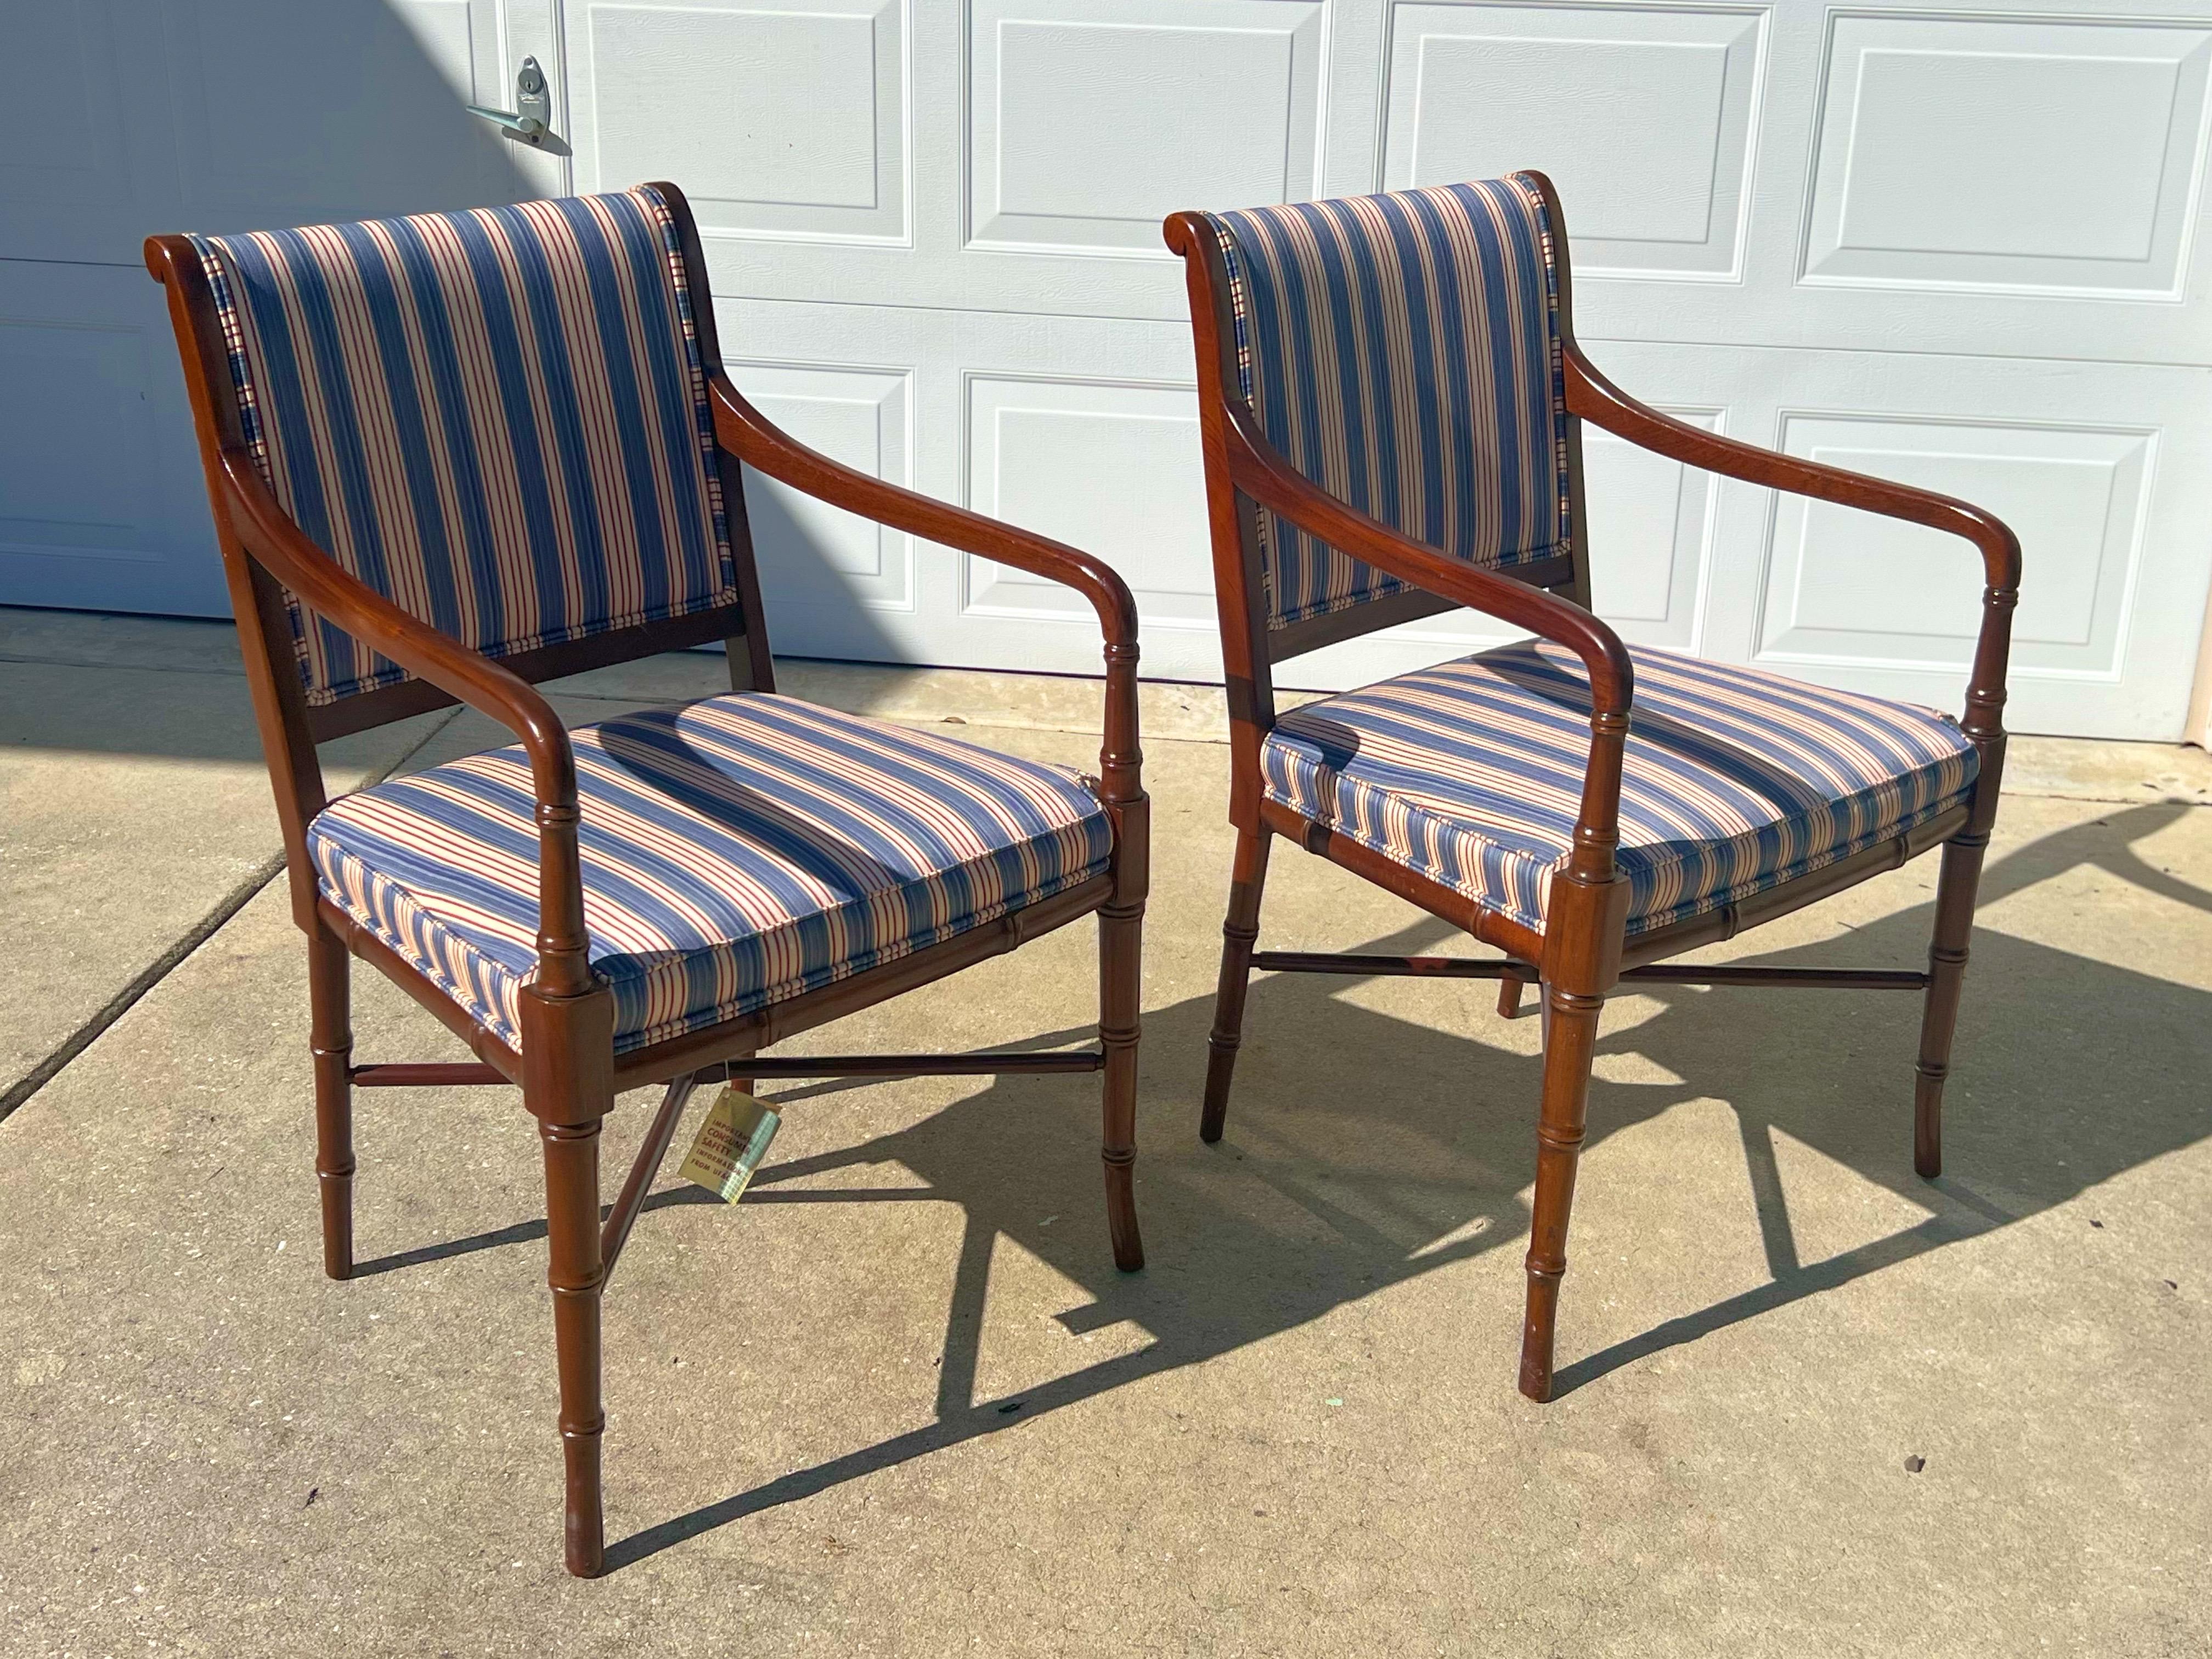 Finely crafted mahogany Regency style armchairs with scrolled crest rail ends and ring turned arm supports and legs. With H stretchers. Upholstered in a lovely fine blue and cream and red tiny striped fabric, very clean.  The fabric is in pristine